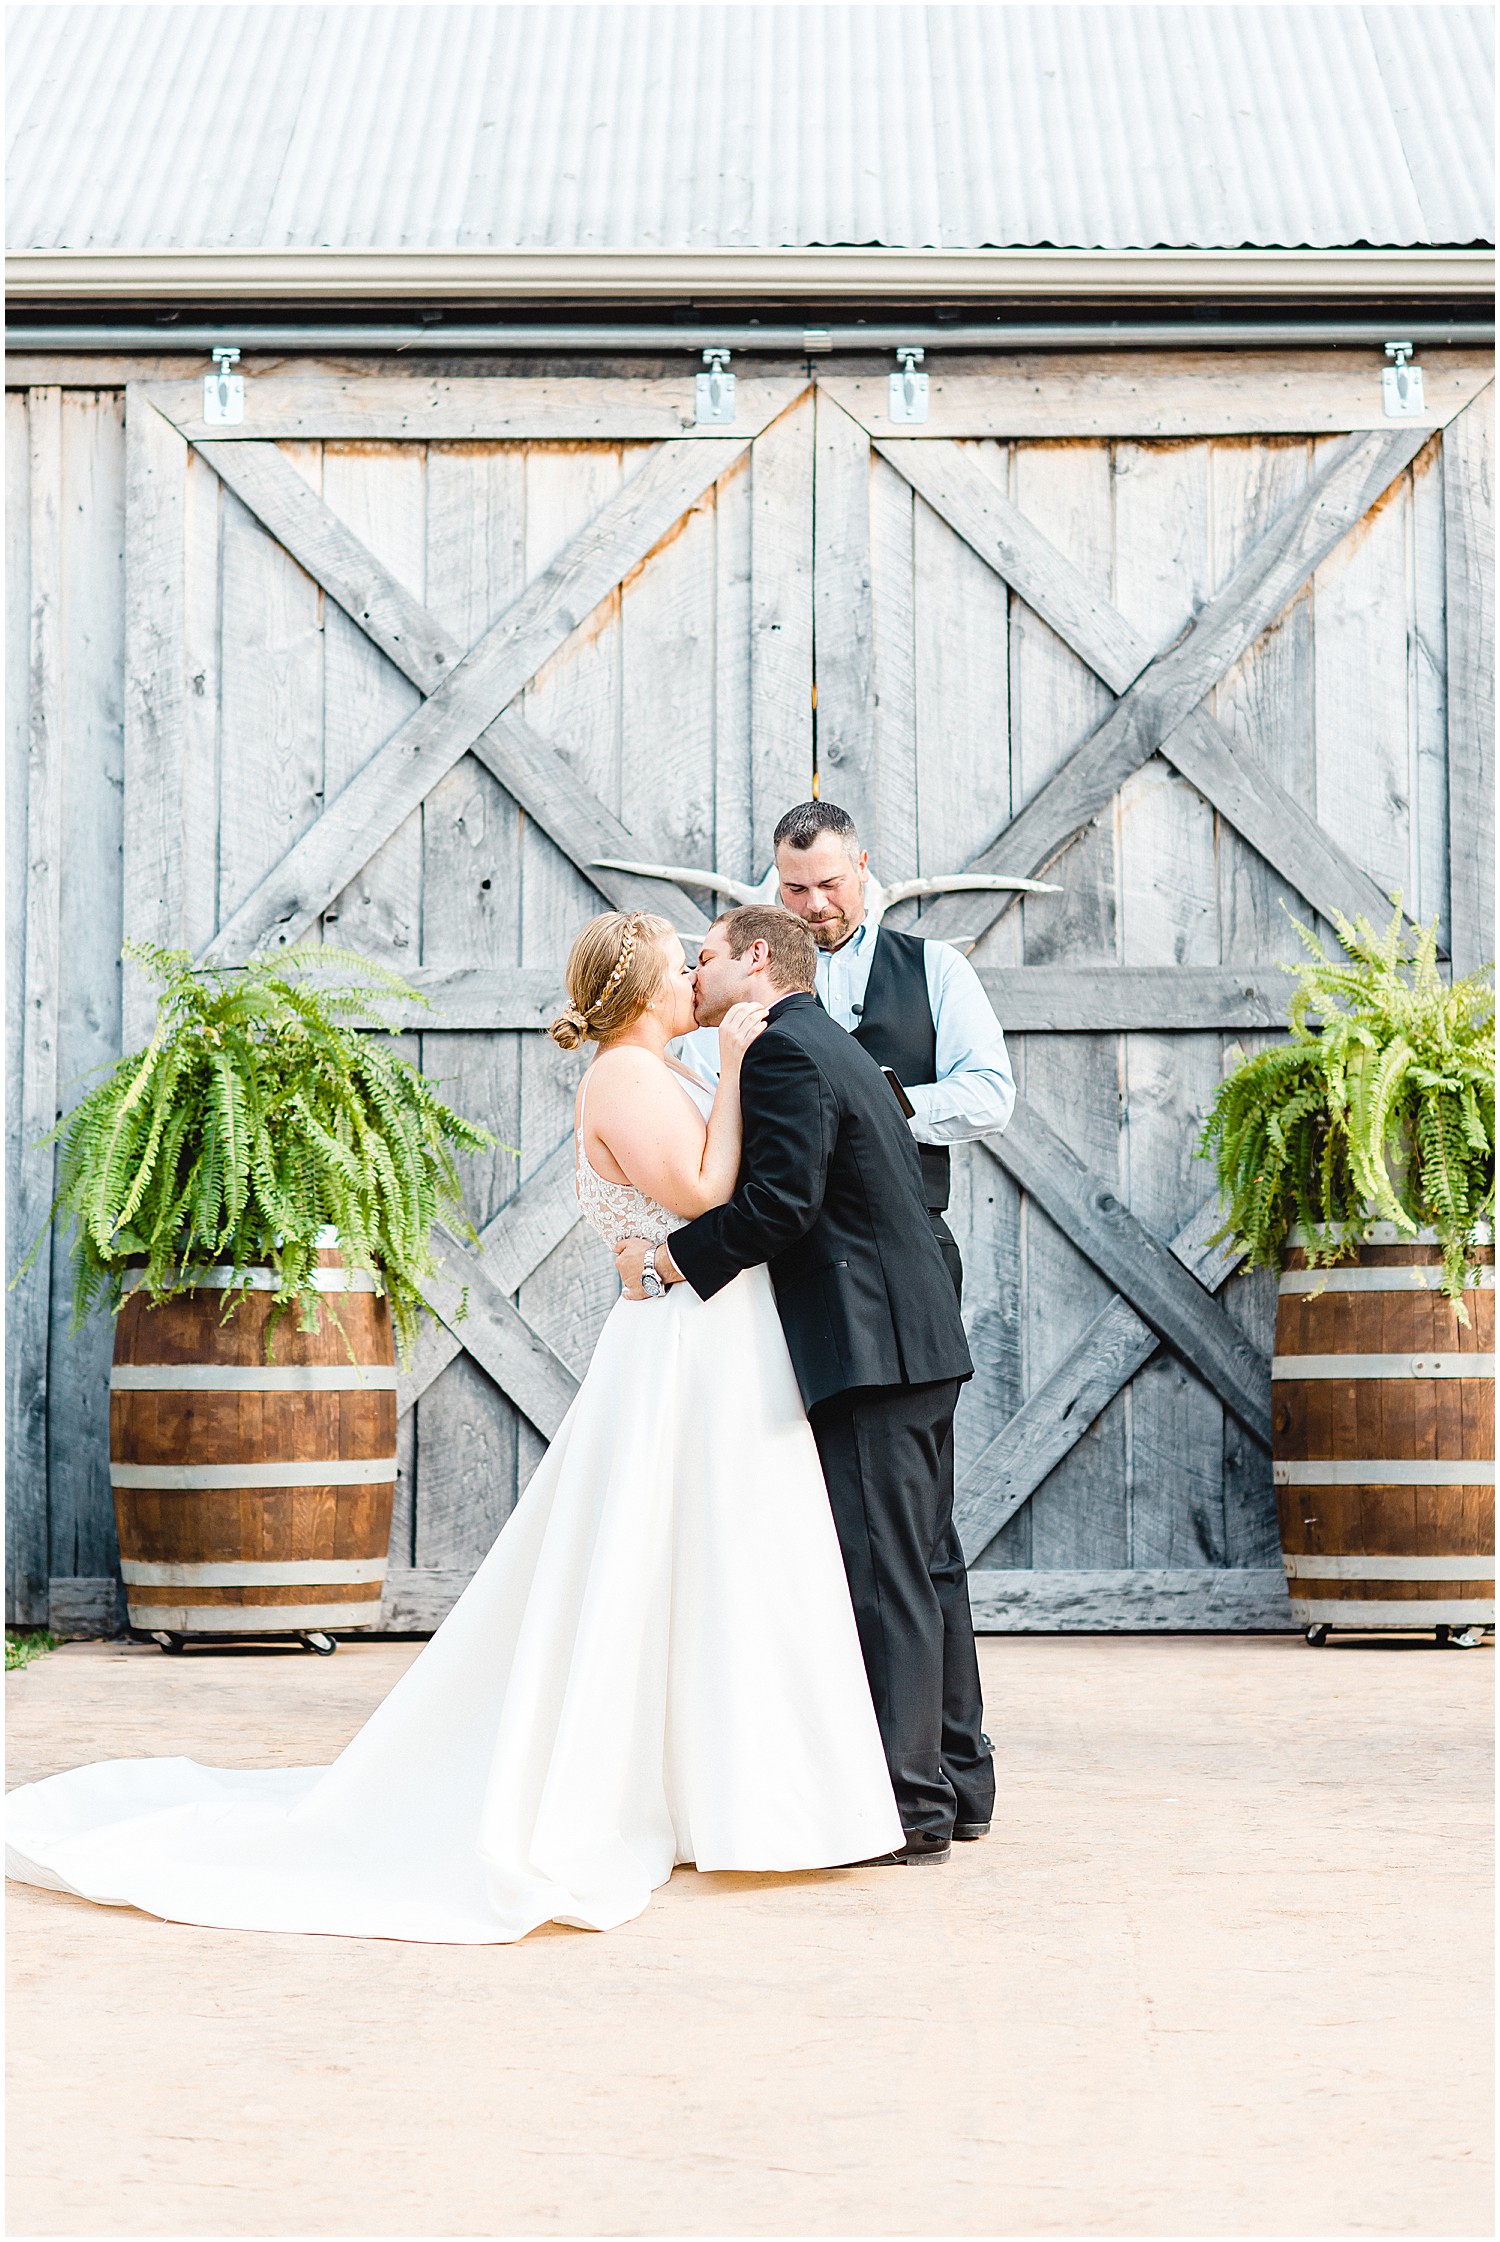 bride and groom first kiss in front of gray barn doors outside at kempker's back 40 wedding